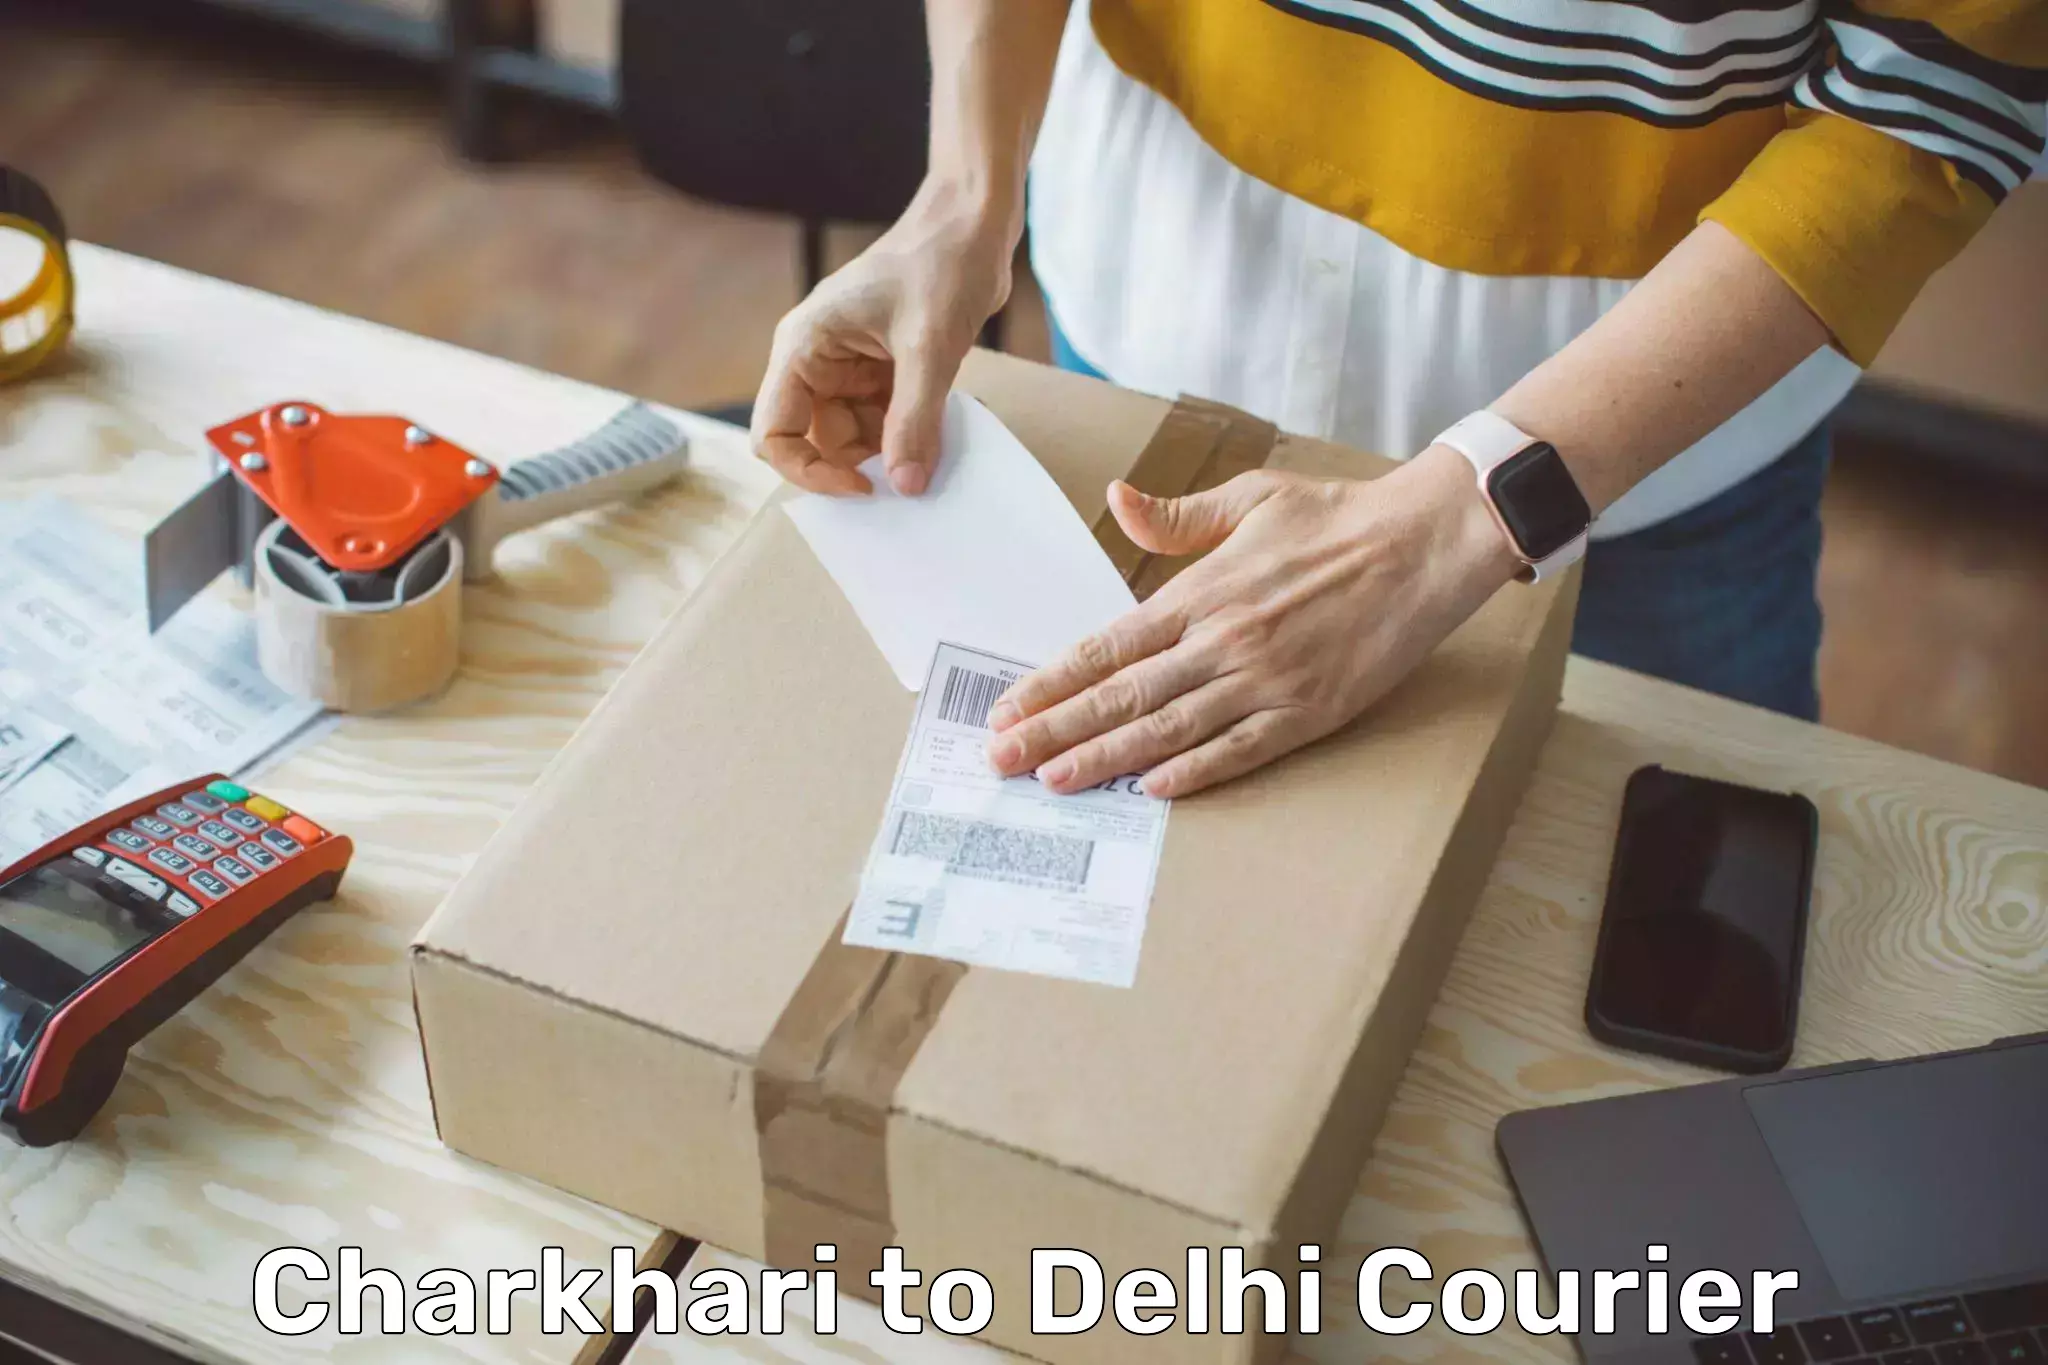 Fast-track shipping solutions Charkhari to NCR